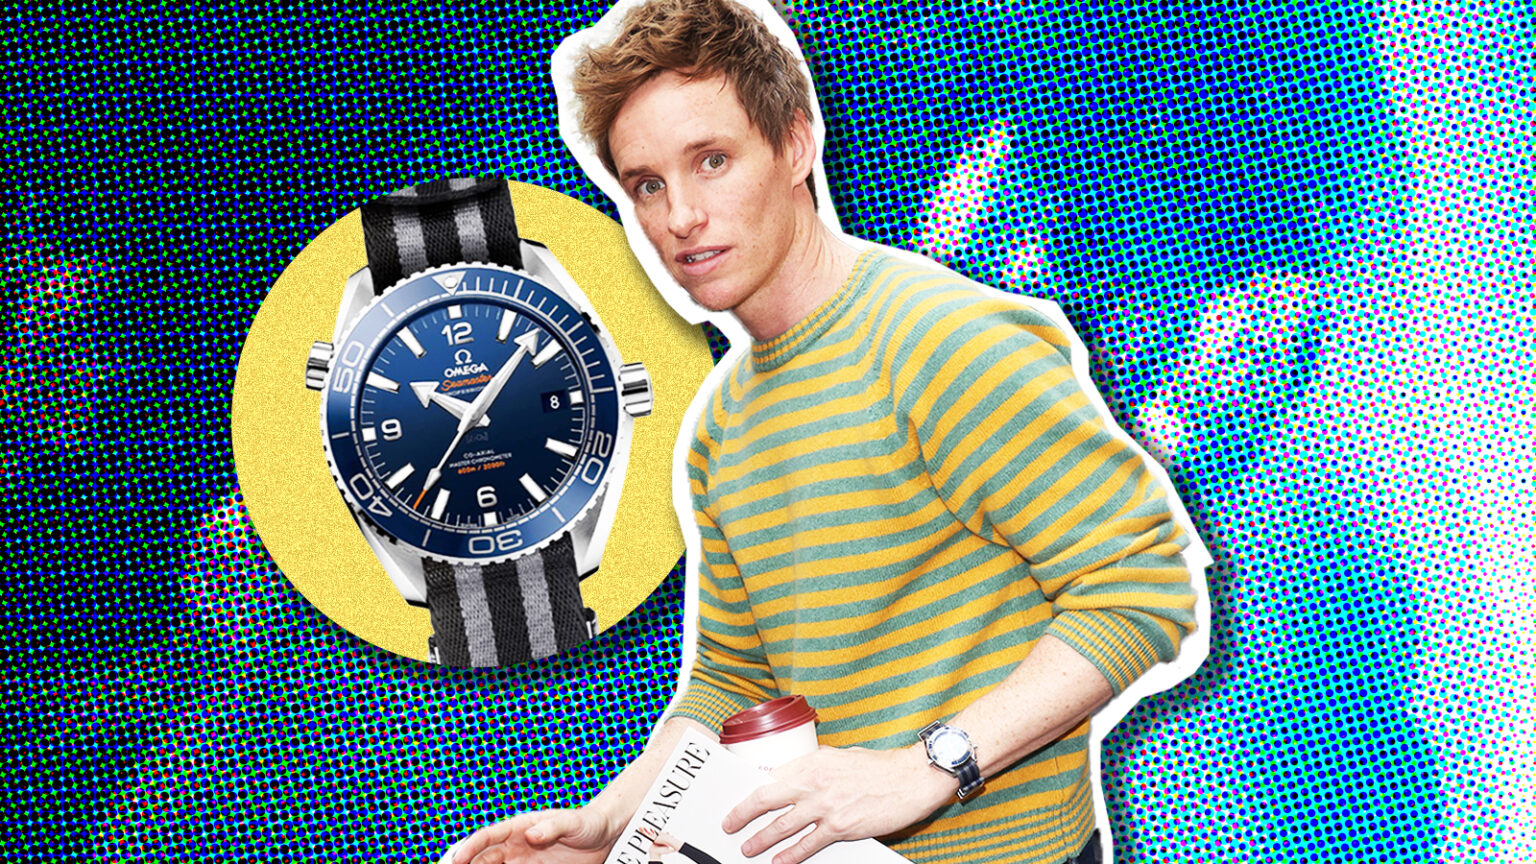 Could Eddie Redmayne Be The Next James Bond His New Watch Says Yes